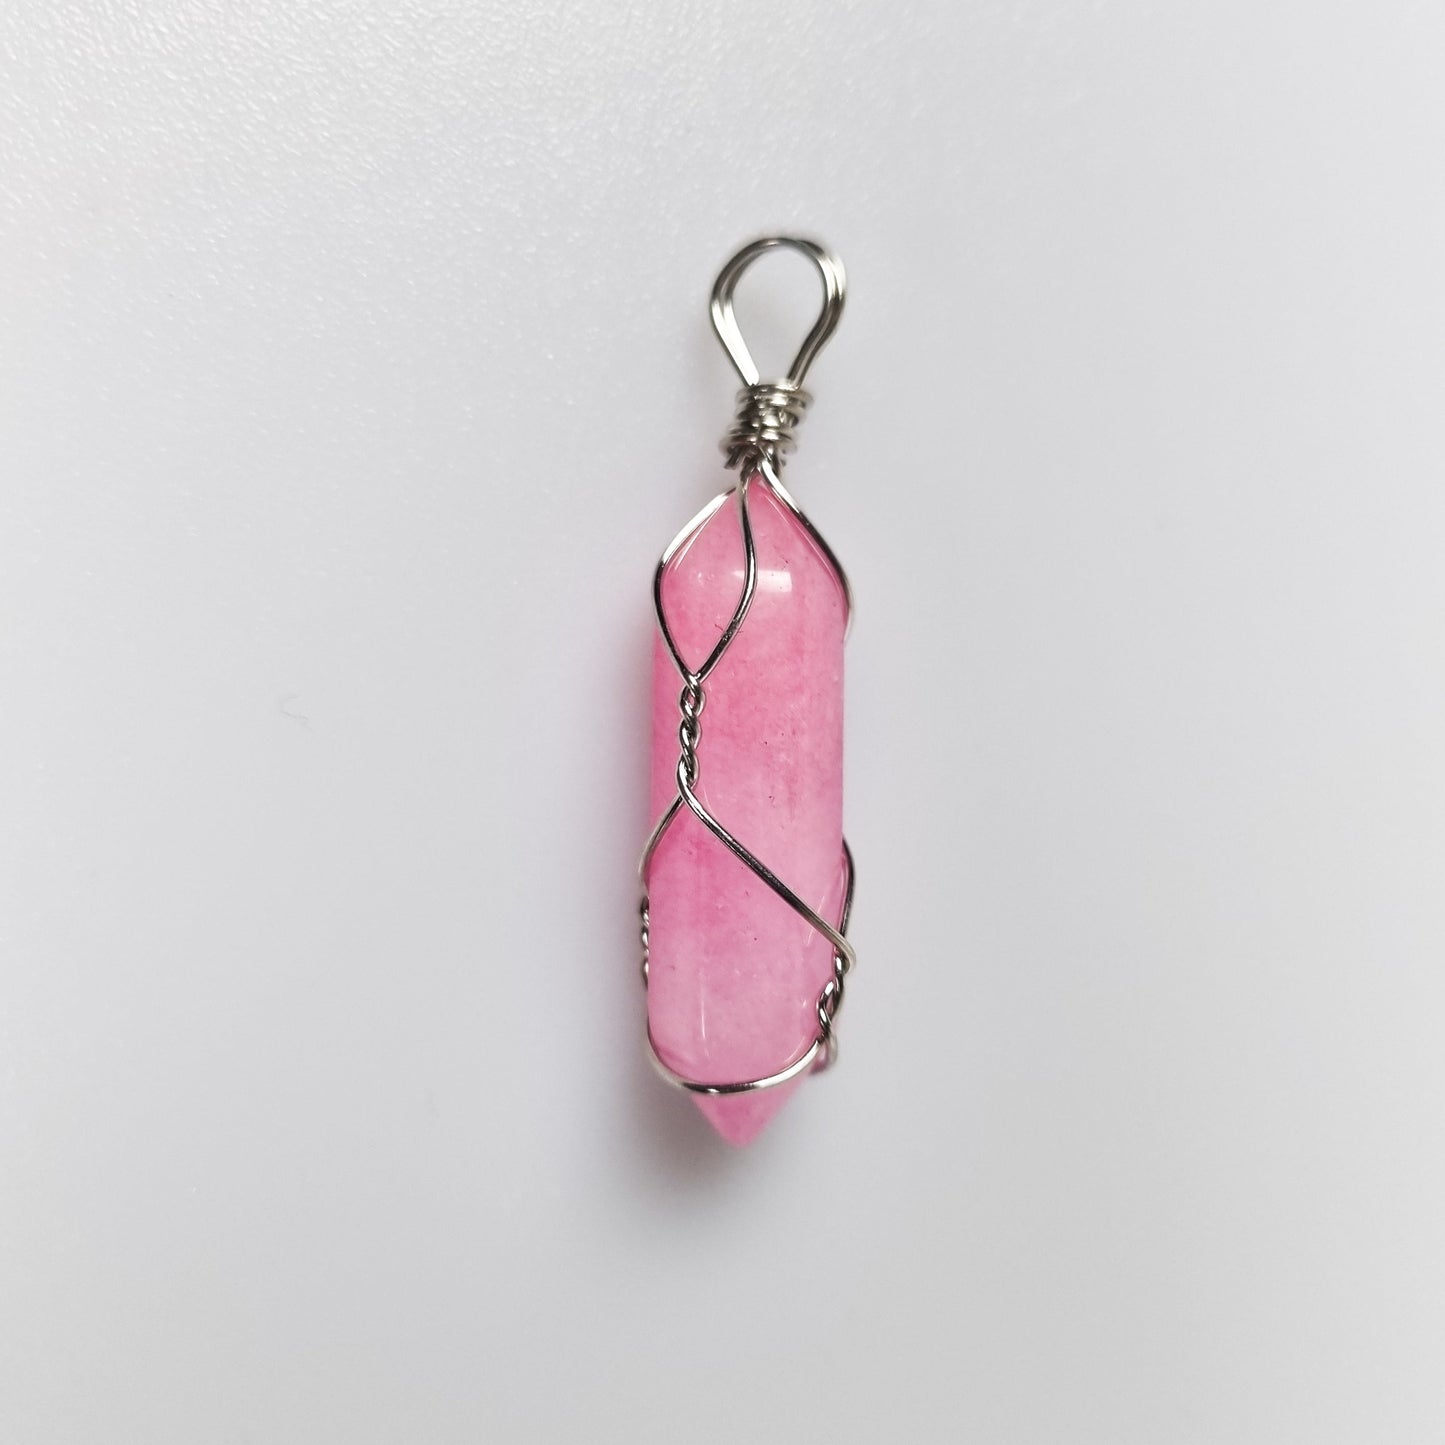 Caged Kyber Crystal Pendants